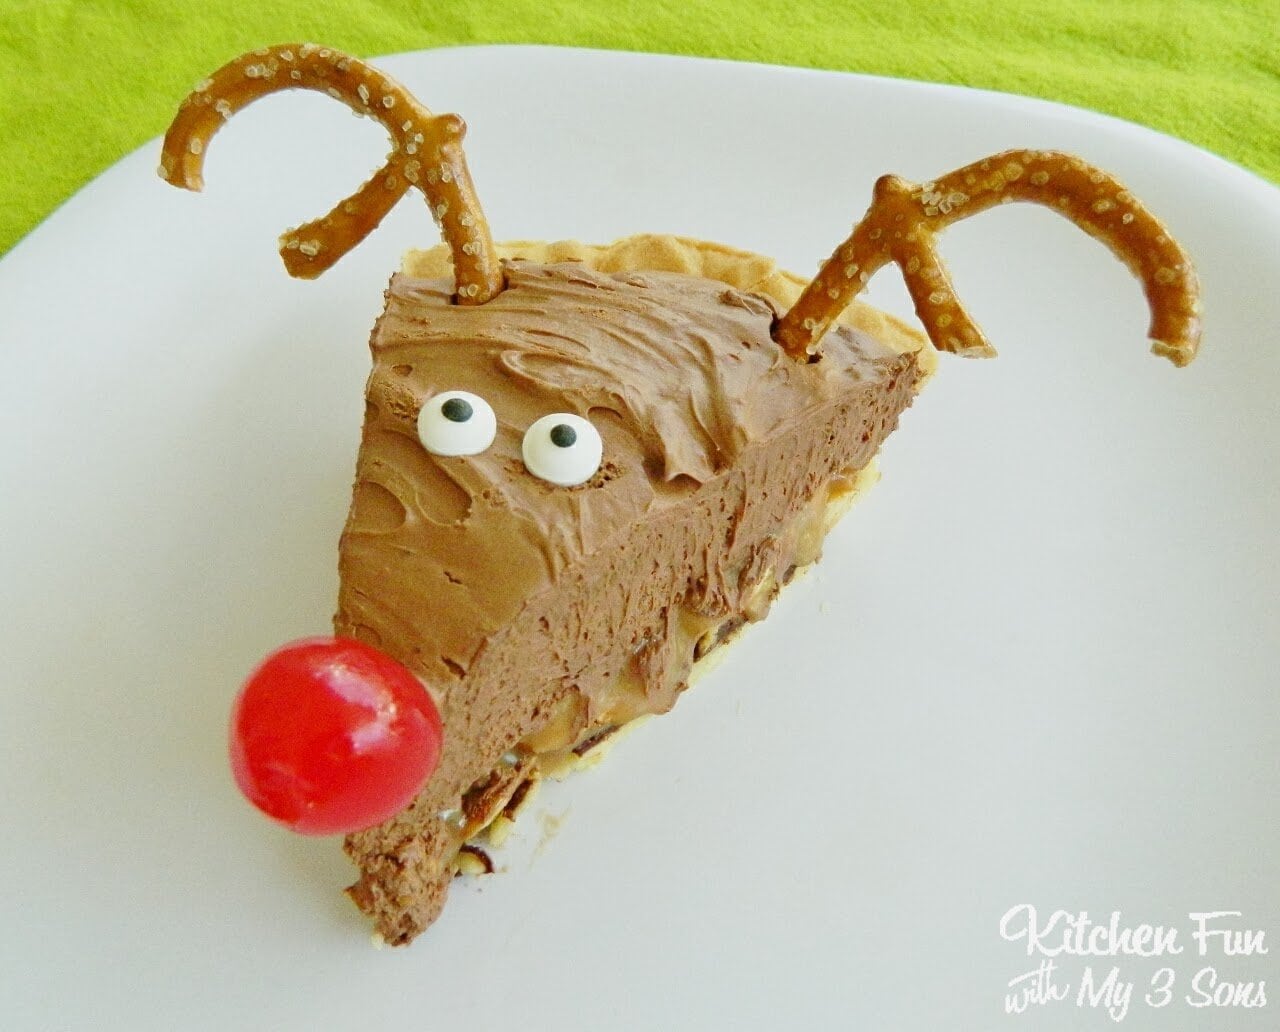 Rudolph the Red Nose Reindeer Pie...this Chocolate Caramel Pie Recipes is AMAZING!